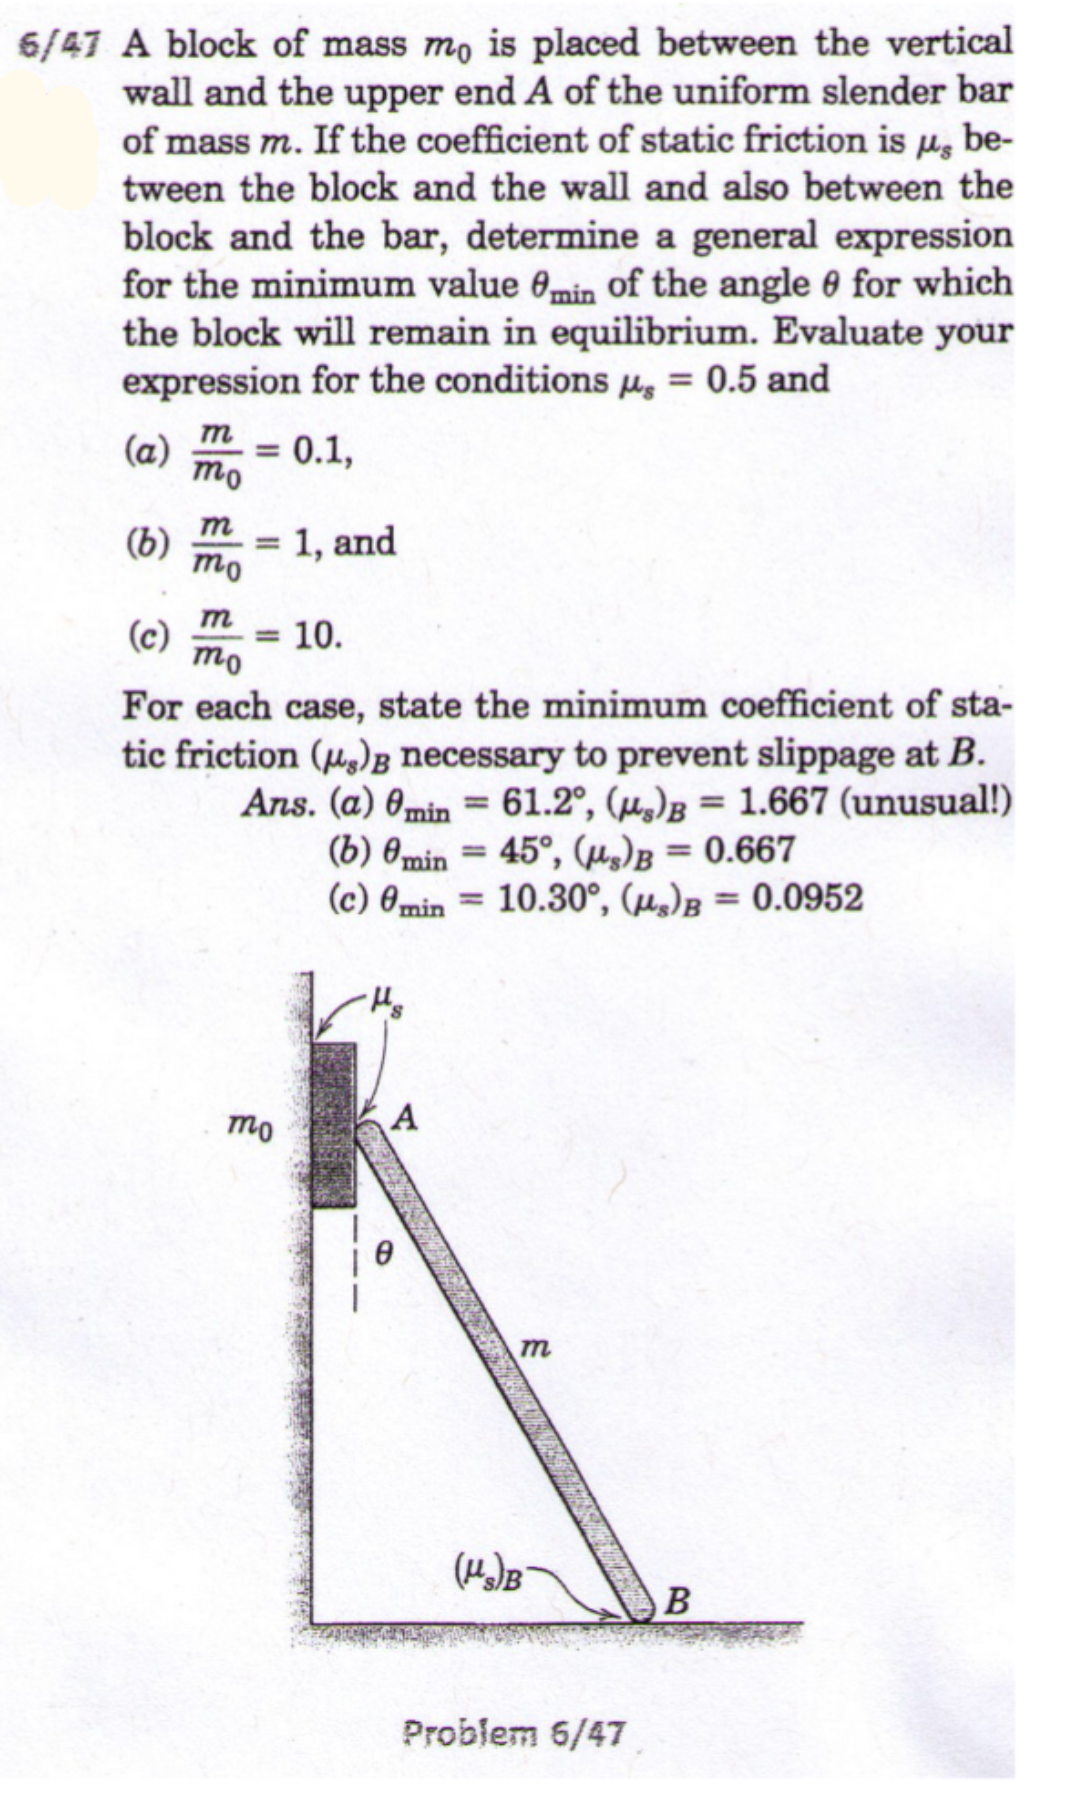 6/47 A block of mass mo is placed between the vertical
wall and the upper end A of the uniform slender bar
of mass m. If the coefficient of static friction is µg be-
tween the block and the wall and also between the
block and the bar, determine a general expression
for the minimum value 0min Oof the angle 0 for which
the block will remain in equilibrium. Evaluate your
expression for the conditions µ = 0.5 and
%3D
т
(a)
mo
0.1,
m
(b)
mo
1, and
m
(c)
mo
10.
%3D
For each case, state the minimum coefficient of sta-
tic friction (u)B necessary to prevent slippage at B.
Ans. (a) 0min = 61.2°, (µ,)B = 1.667 (unusual!)
(b) 0min = 45°, (µ)B = 0.667
(c) 0min = 10.30°, (µ,)B = 0.0952
%3D
%3D
%3D
%3D
%3D
mo
m
(Ha)B
Problem 6/47
